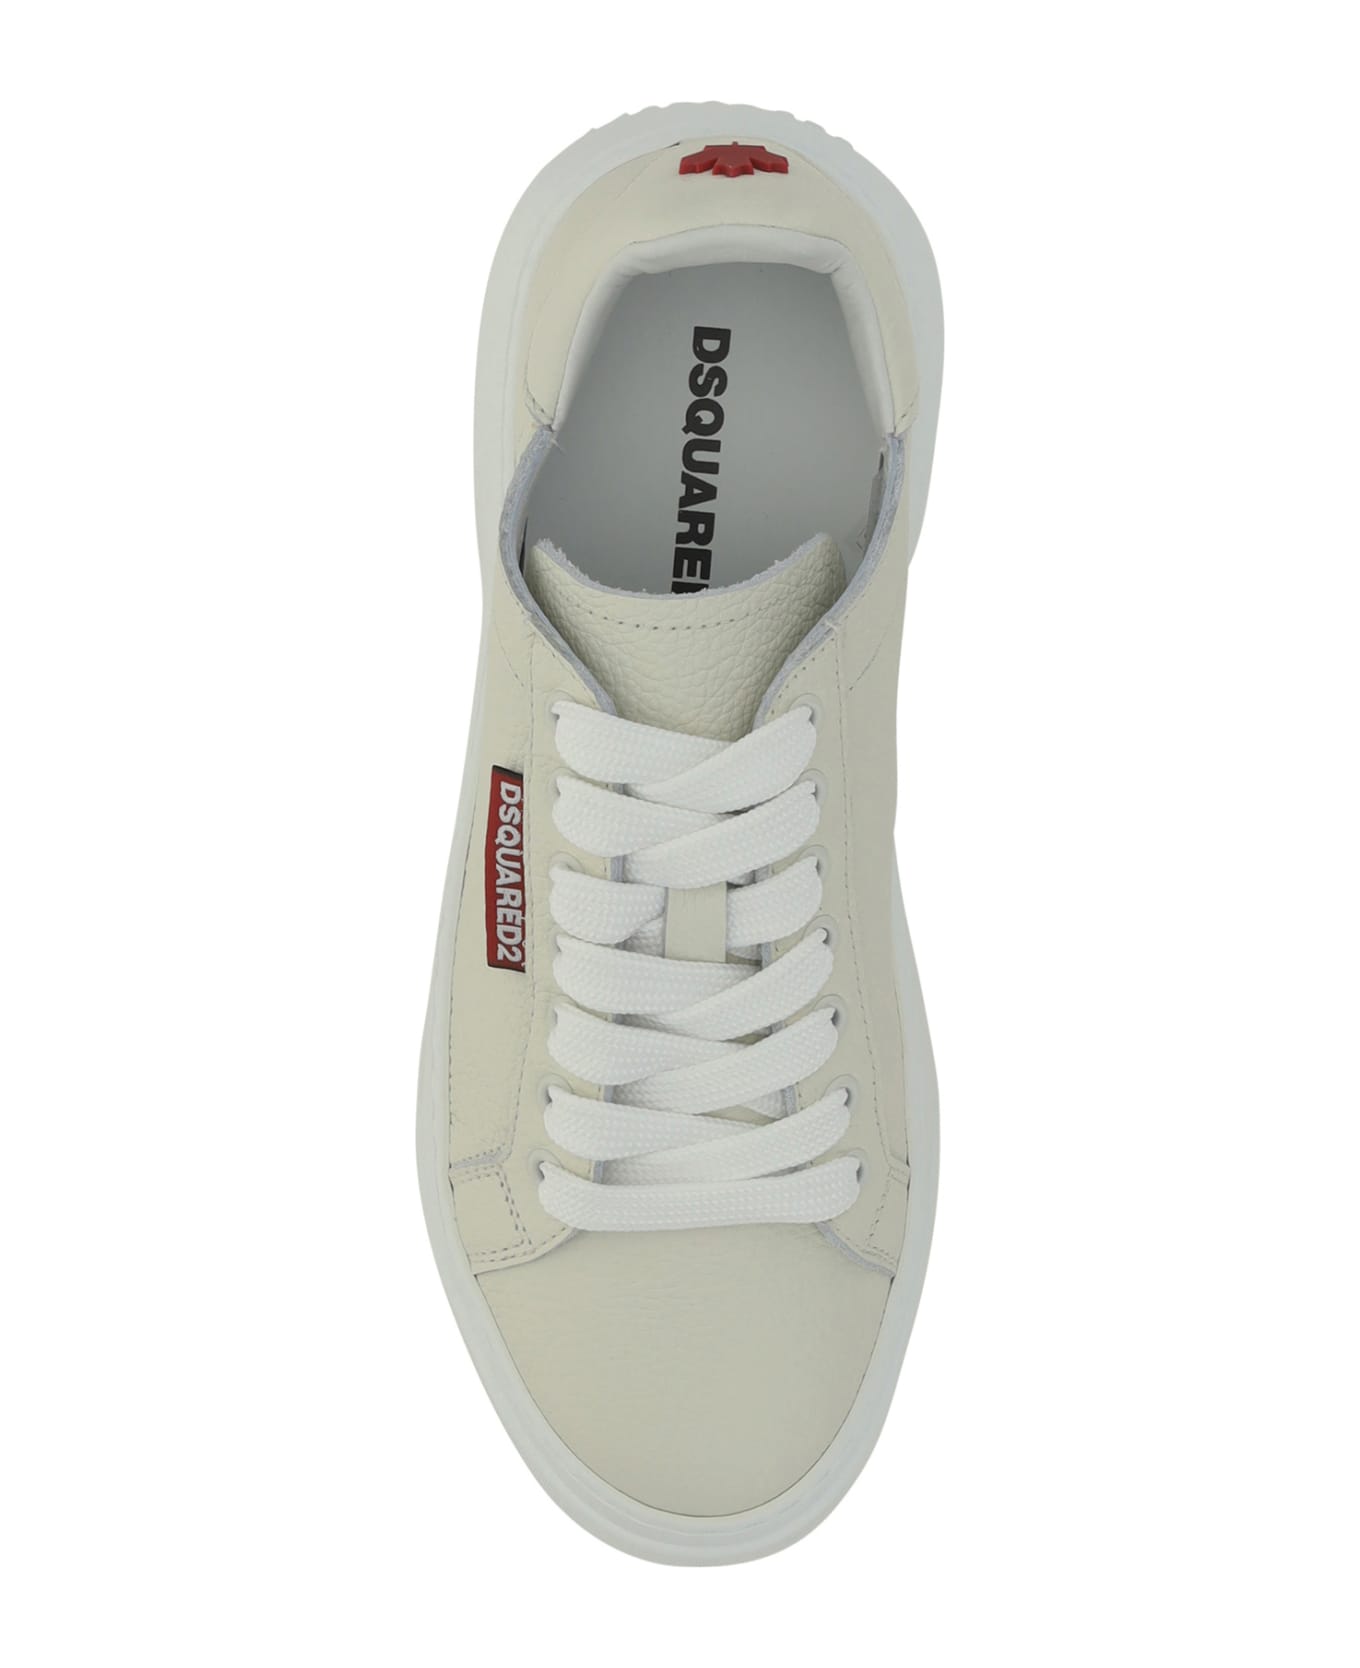 Dsquared2 Sneakers - Panna